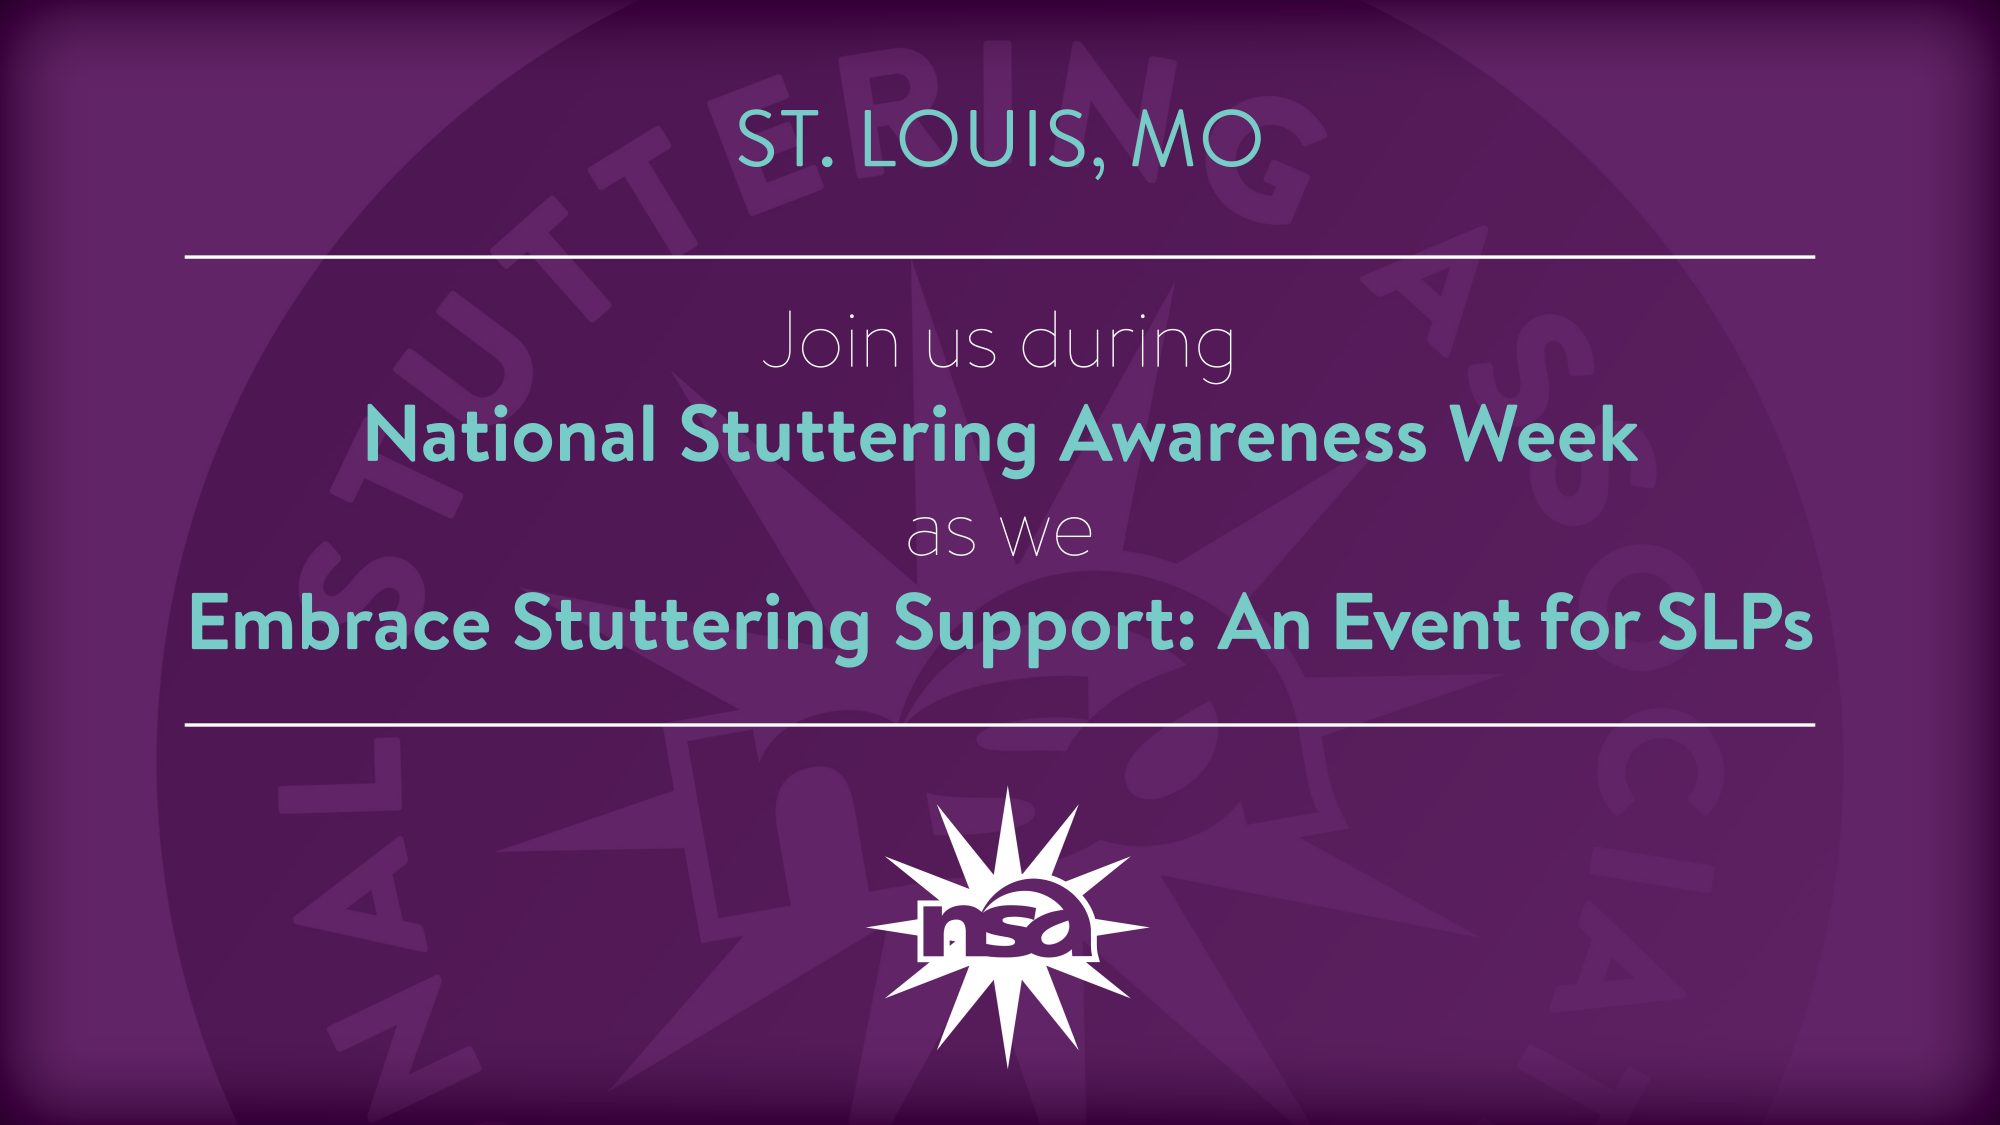 ST Louis, MO Embrace Stuttering Support: An Event for SLPs